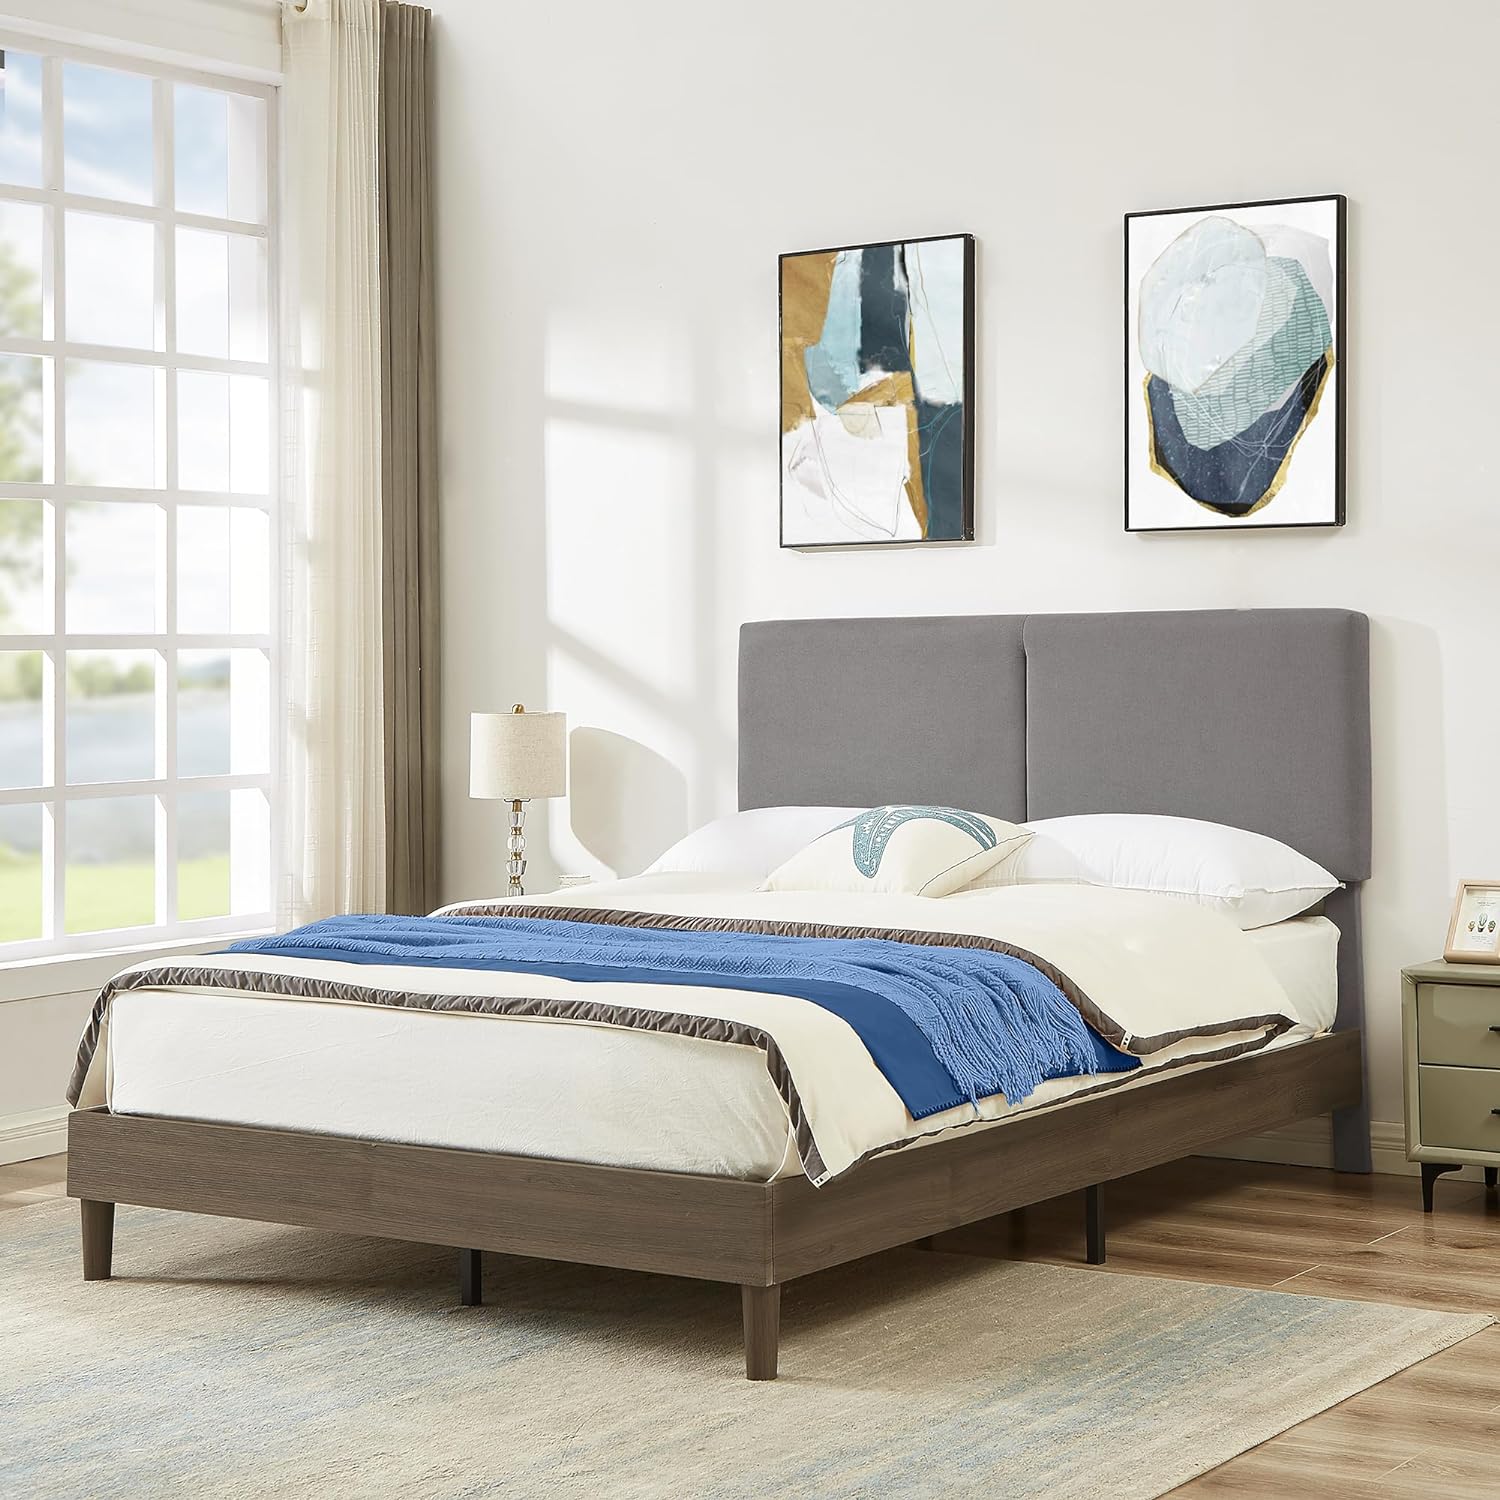 VECELO Upholstered Platform Bed Frame with Height-Adjustable Cotton and Linen Headboard